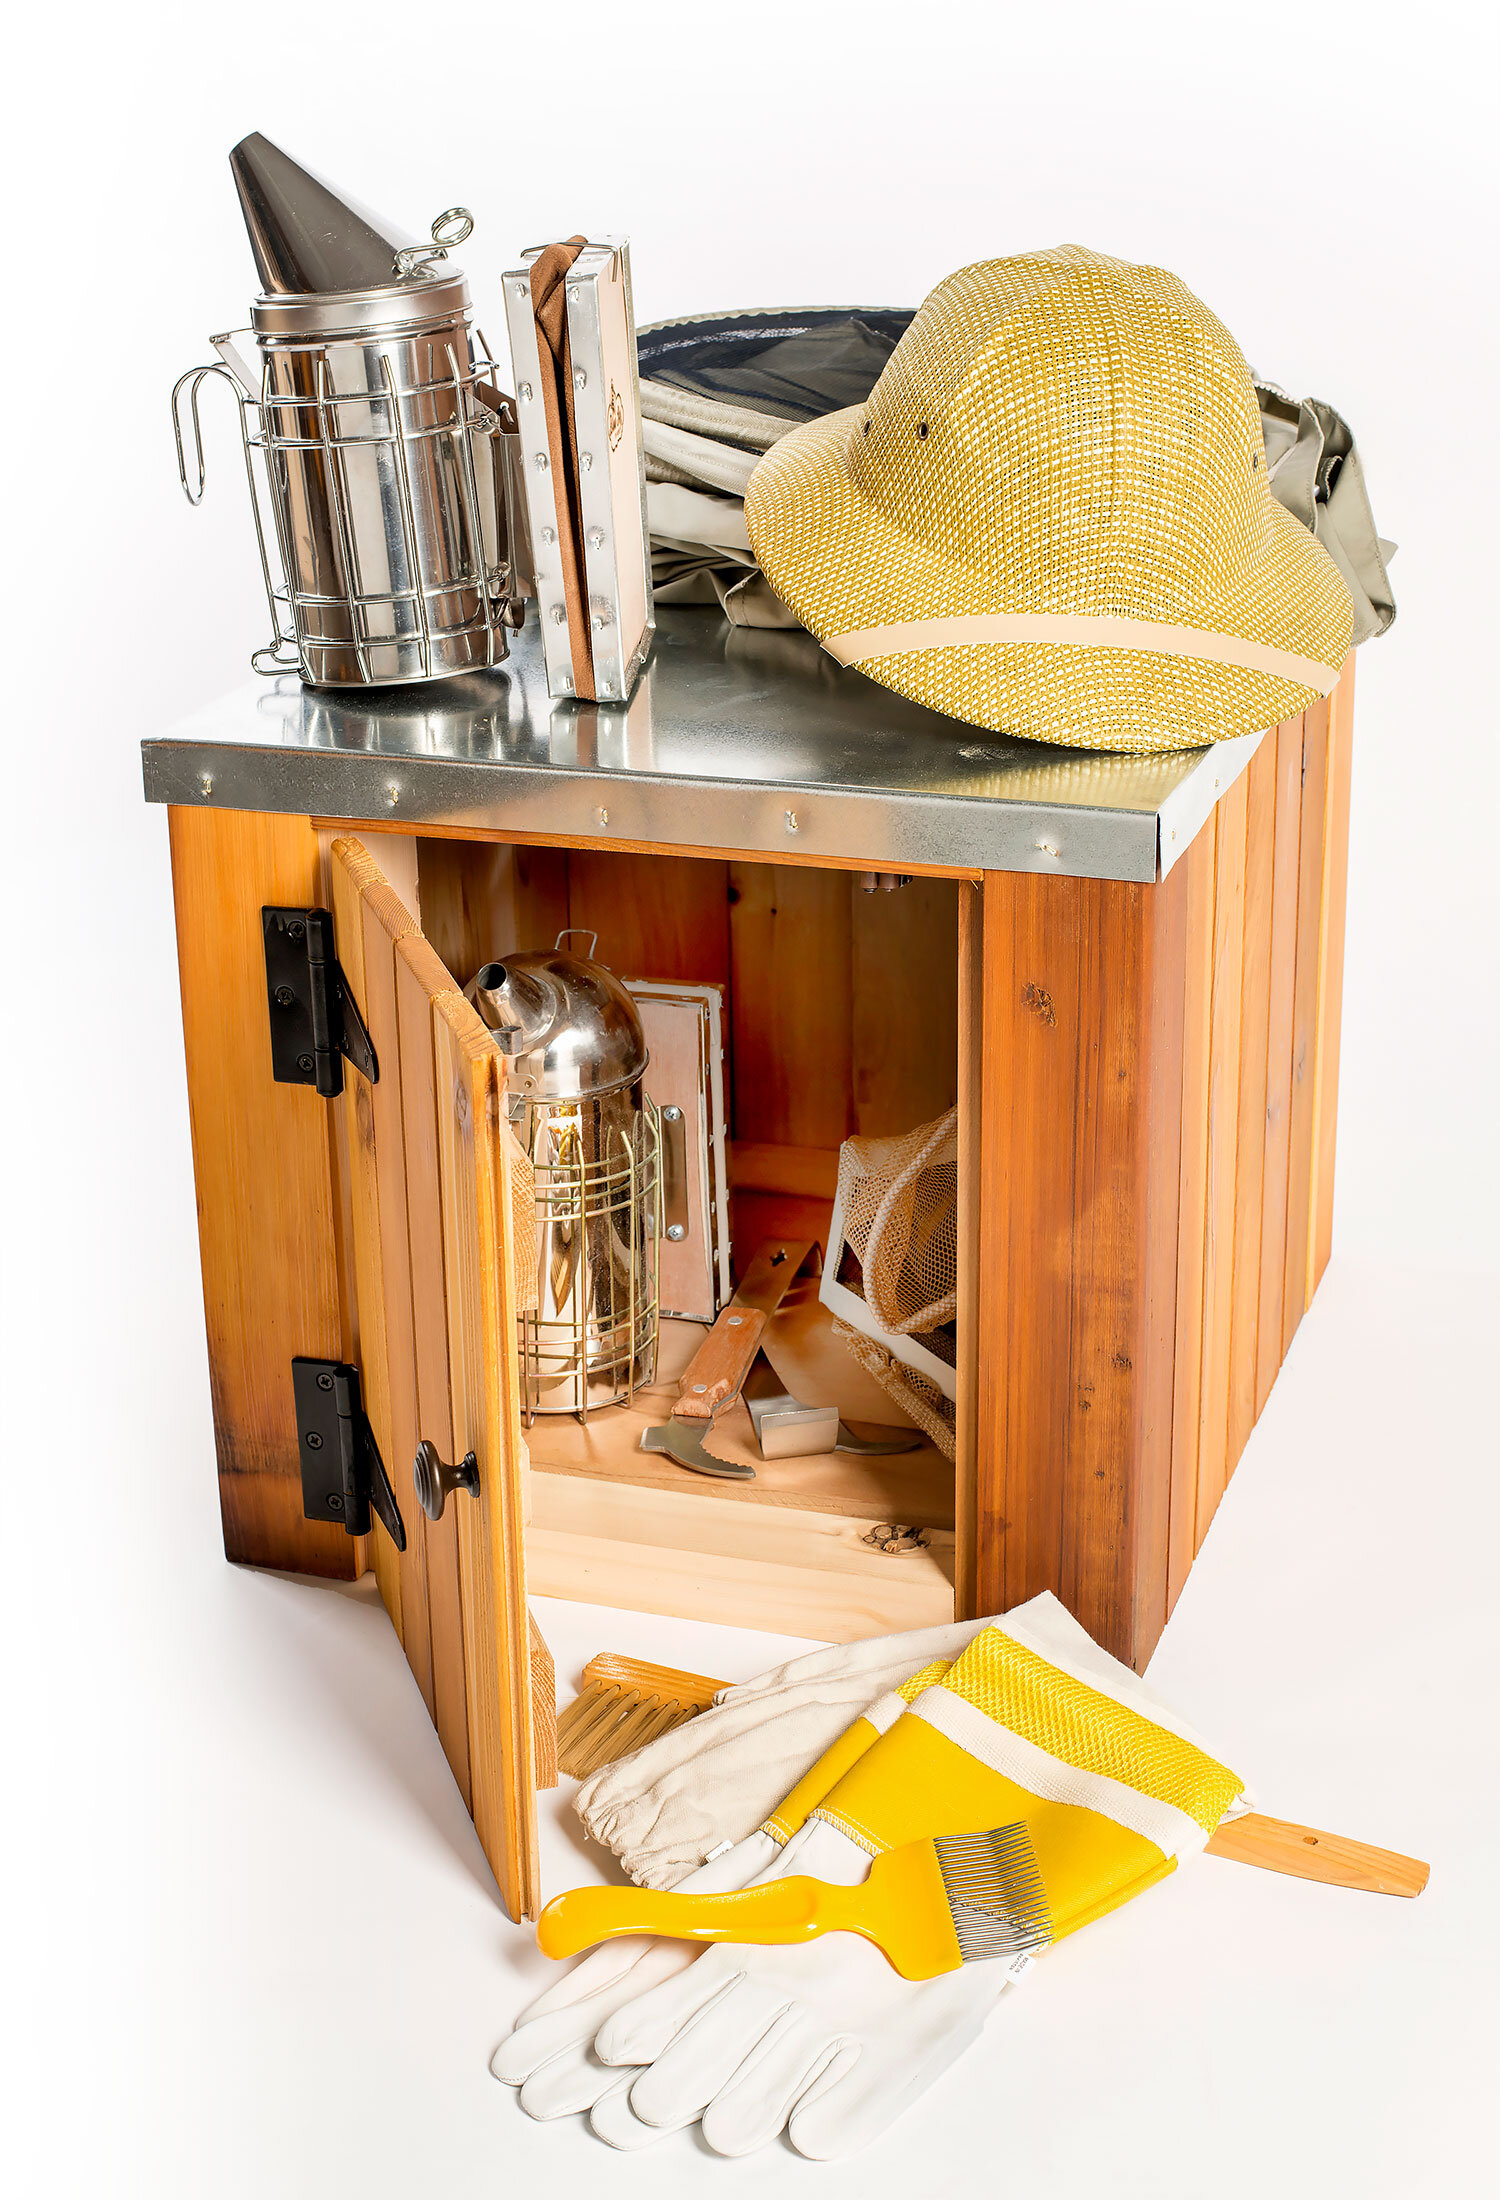 bee-keeper-base-storage-cabinet-product-photography-photographer-paul-george.jpg